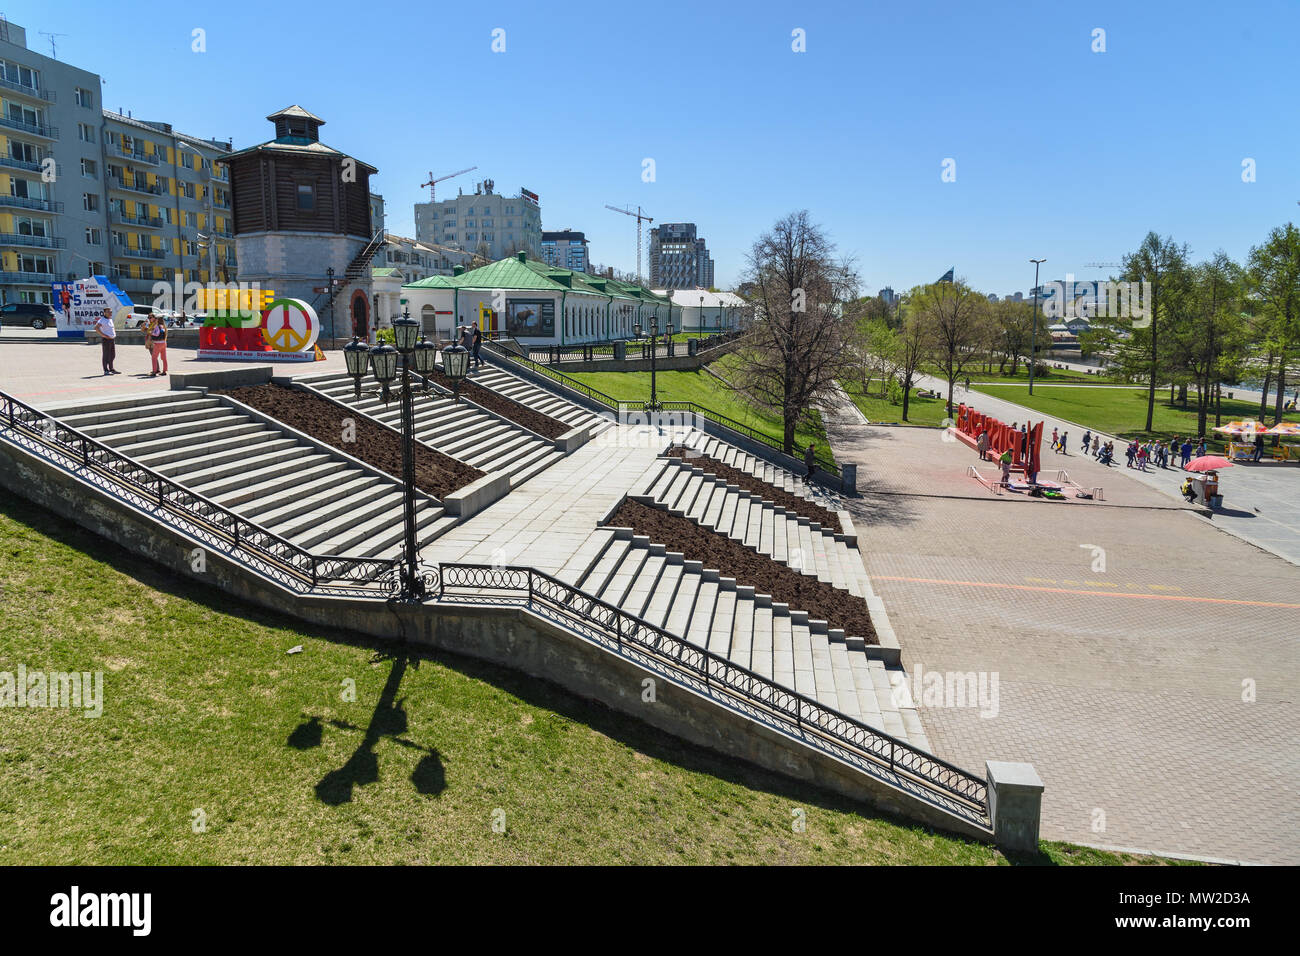 Yekaterinburg, Russia - May 23, 2018: View of Historical Square on Iset River in center of city Stock Photo